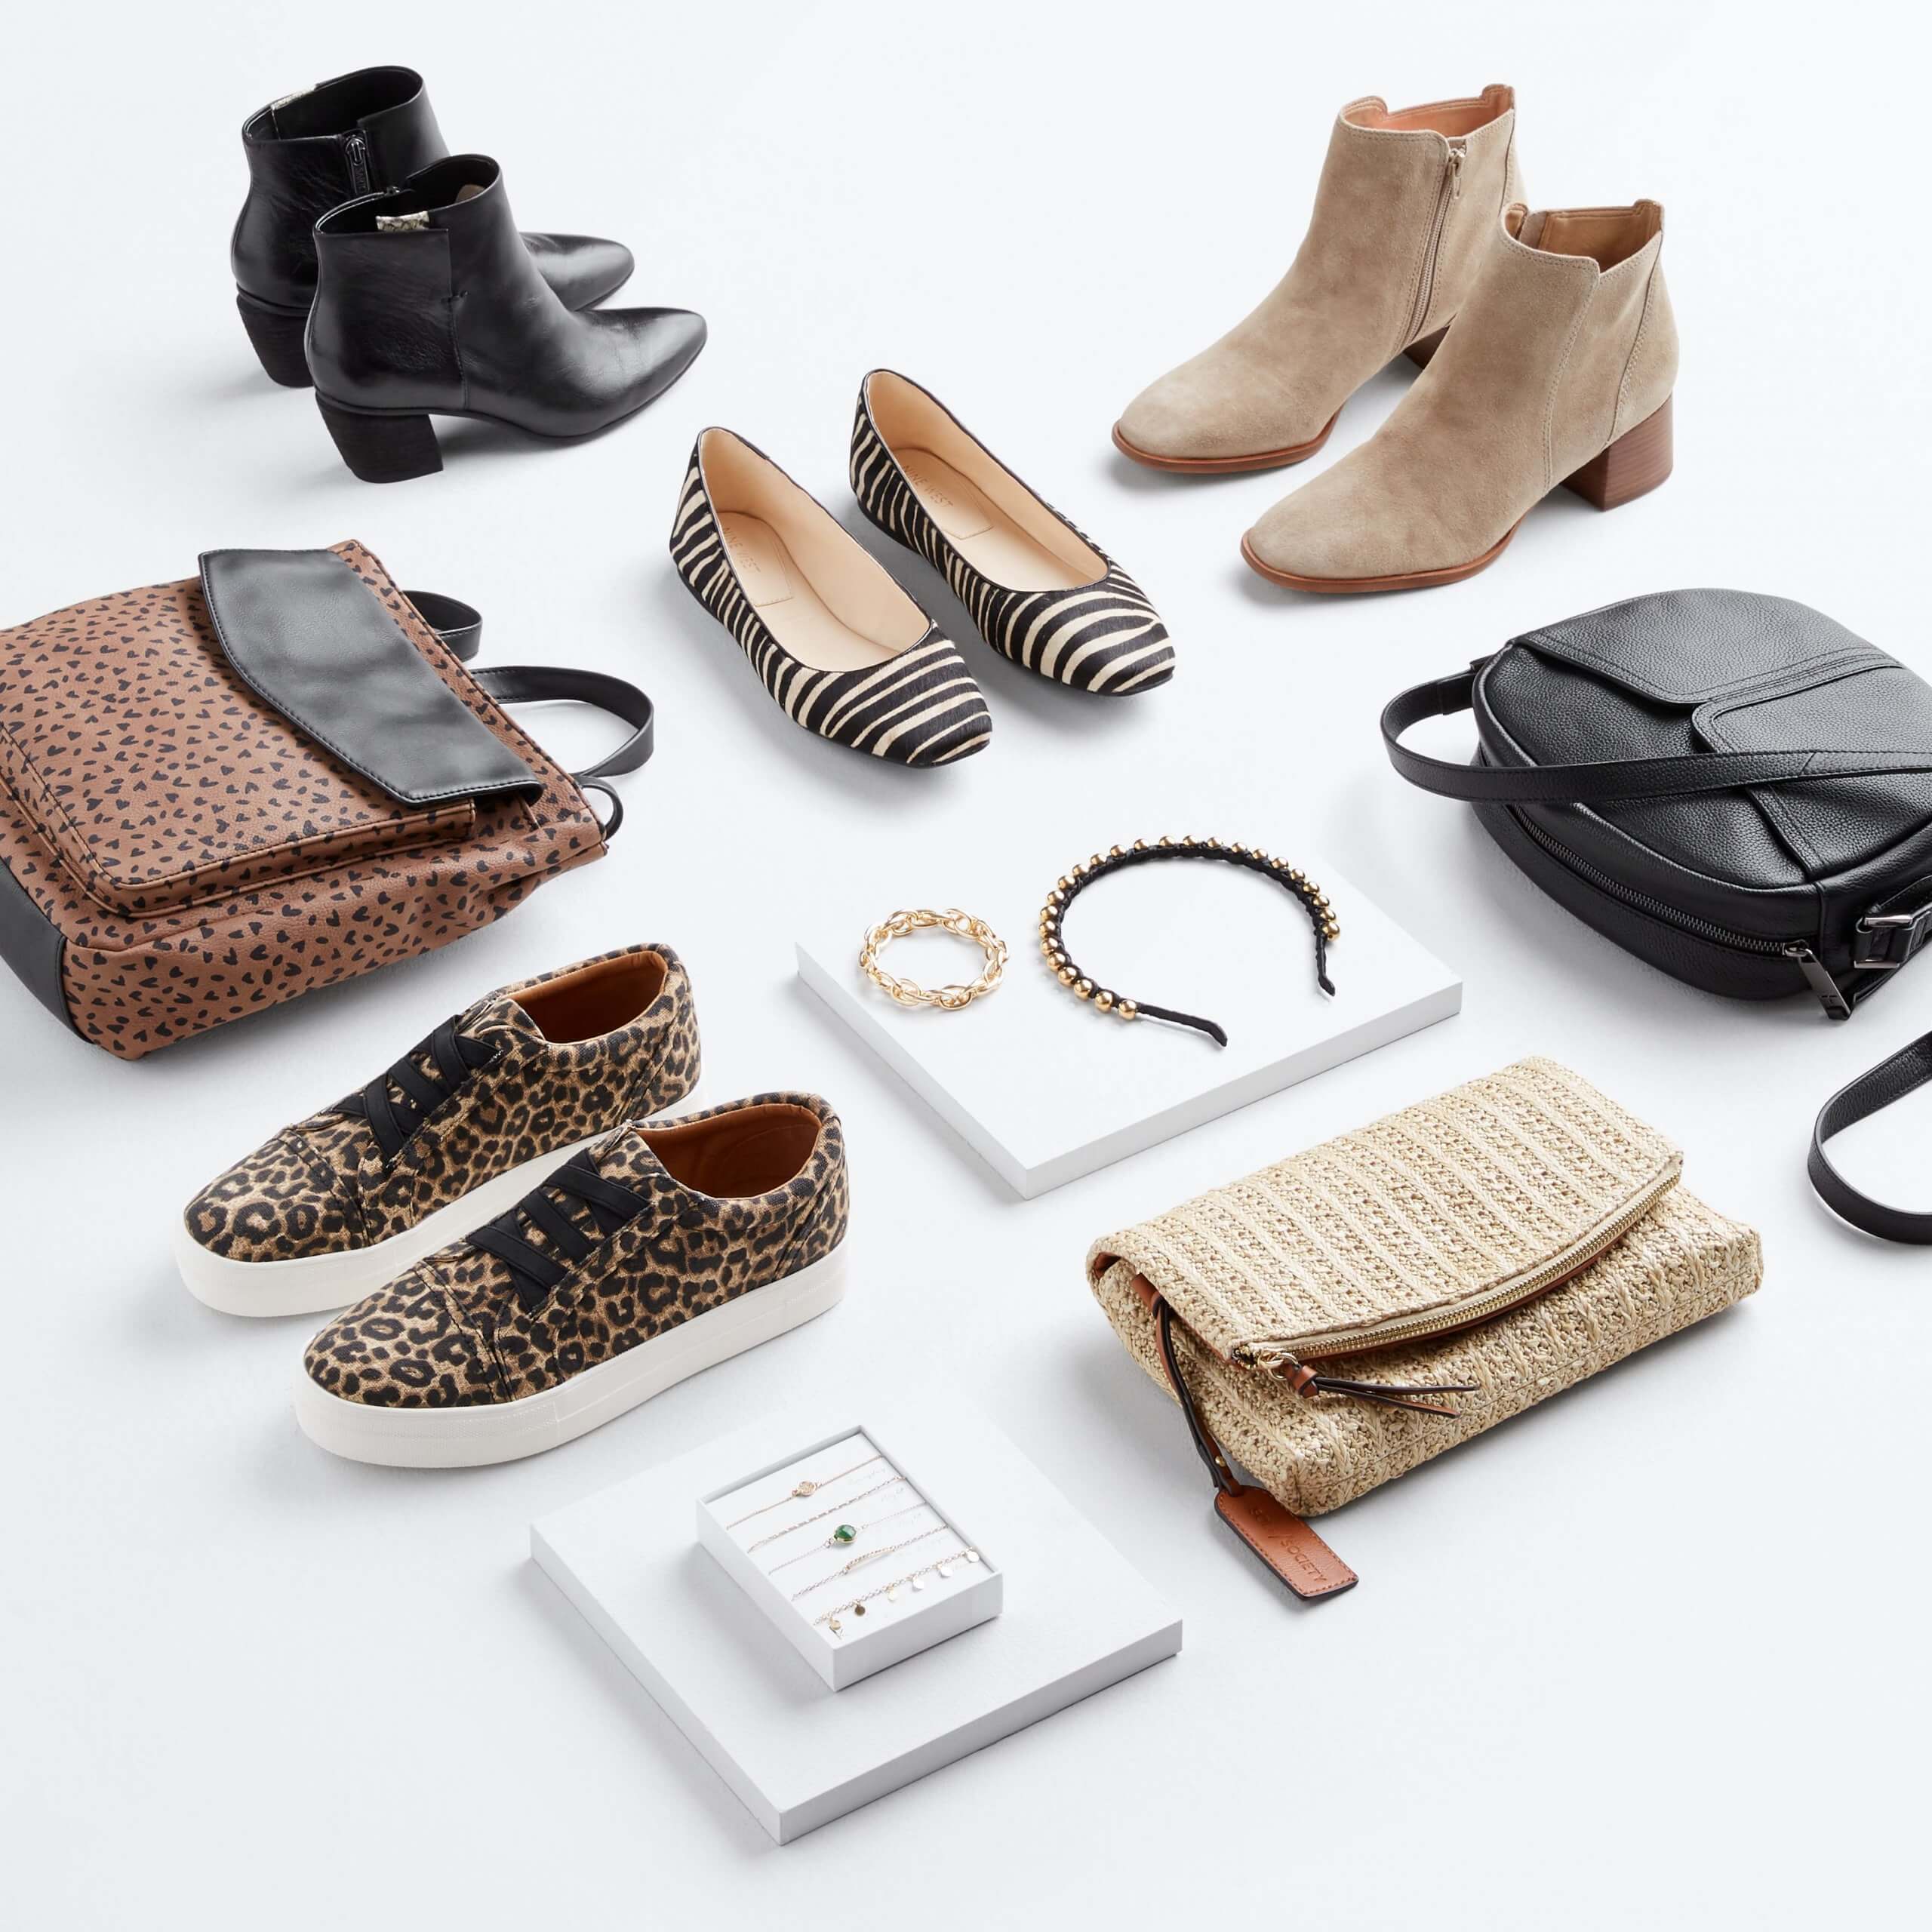 Stitch Fix Women’s laydown featuring black heeled booties, black striped flats, tan heeled booties, black purse, tan clutch, animal print sneakers and animal print purse on the floor with black headband and gold bracelets on white blocks. 